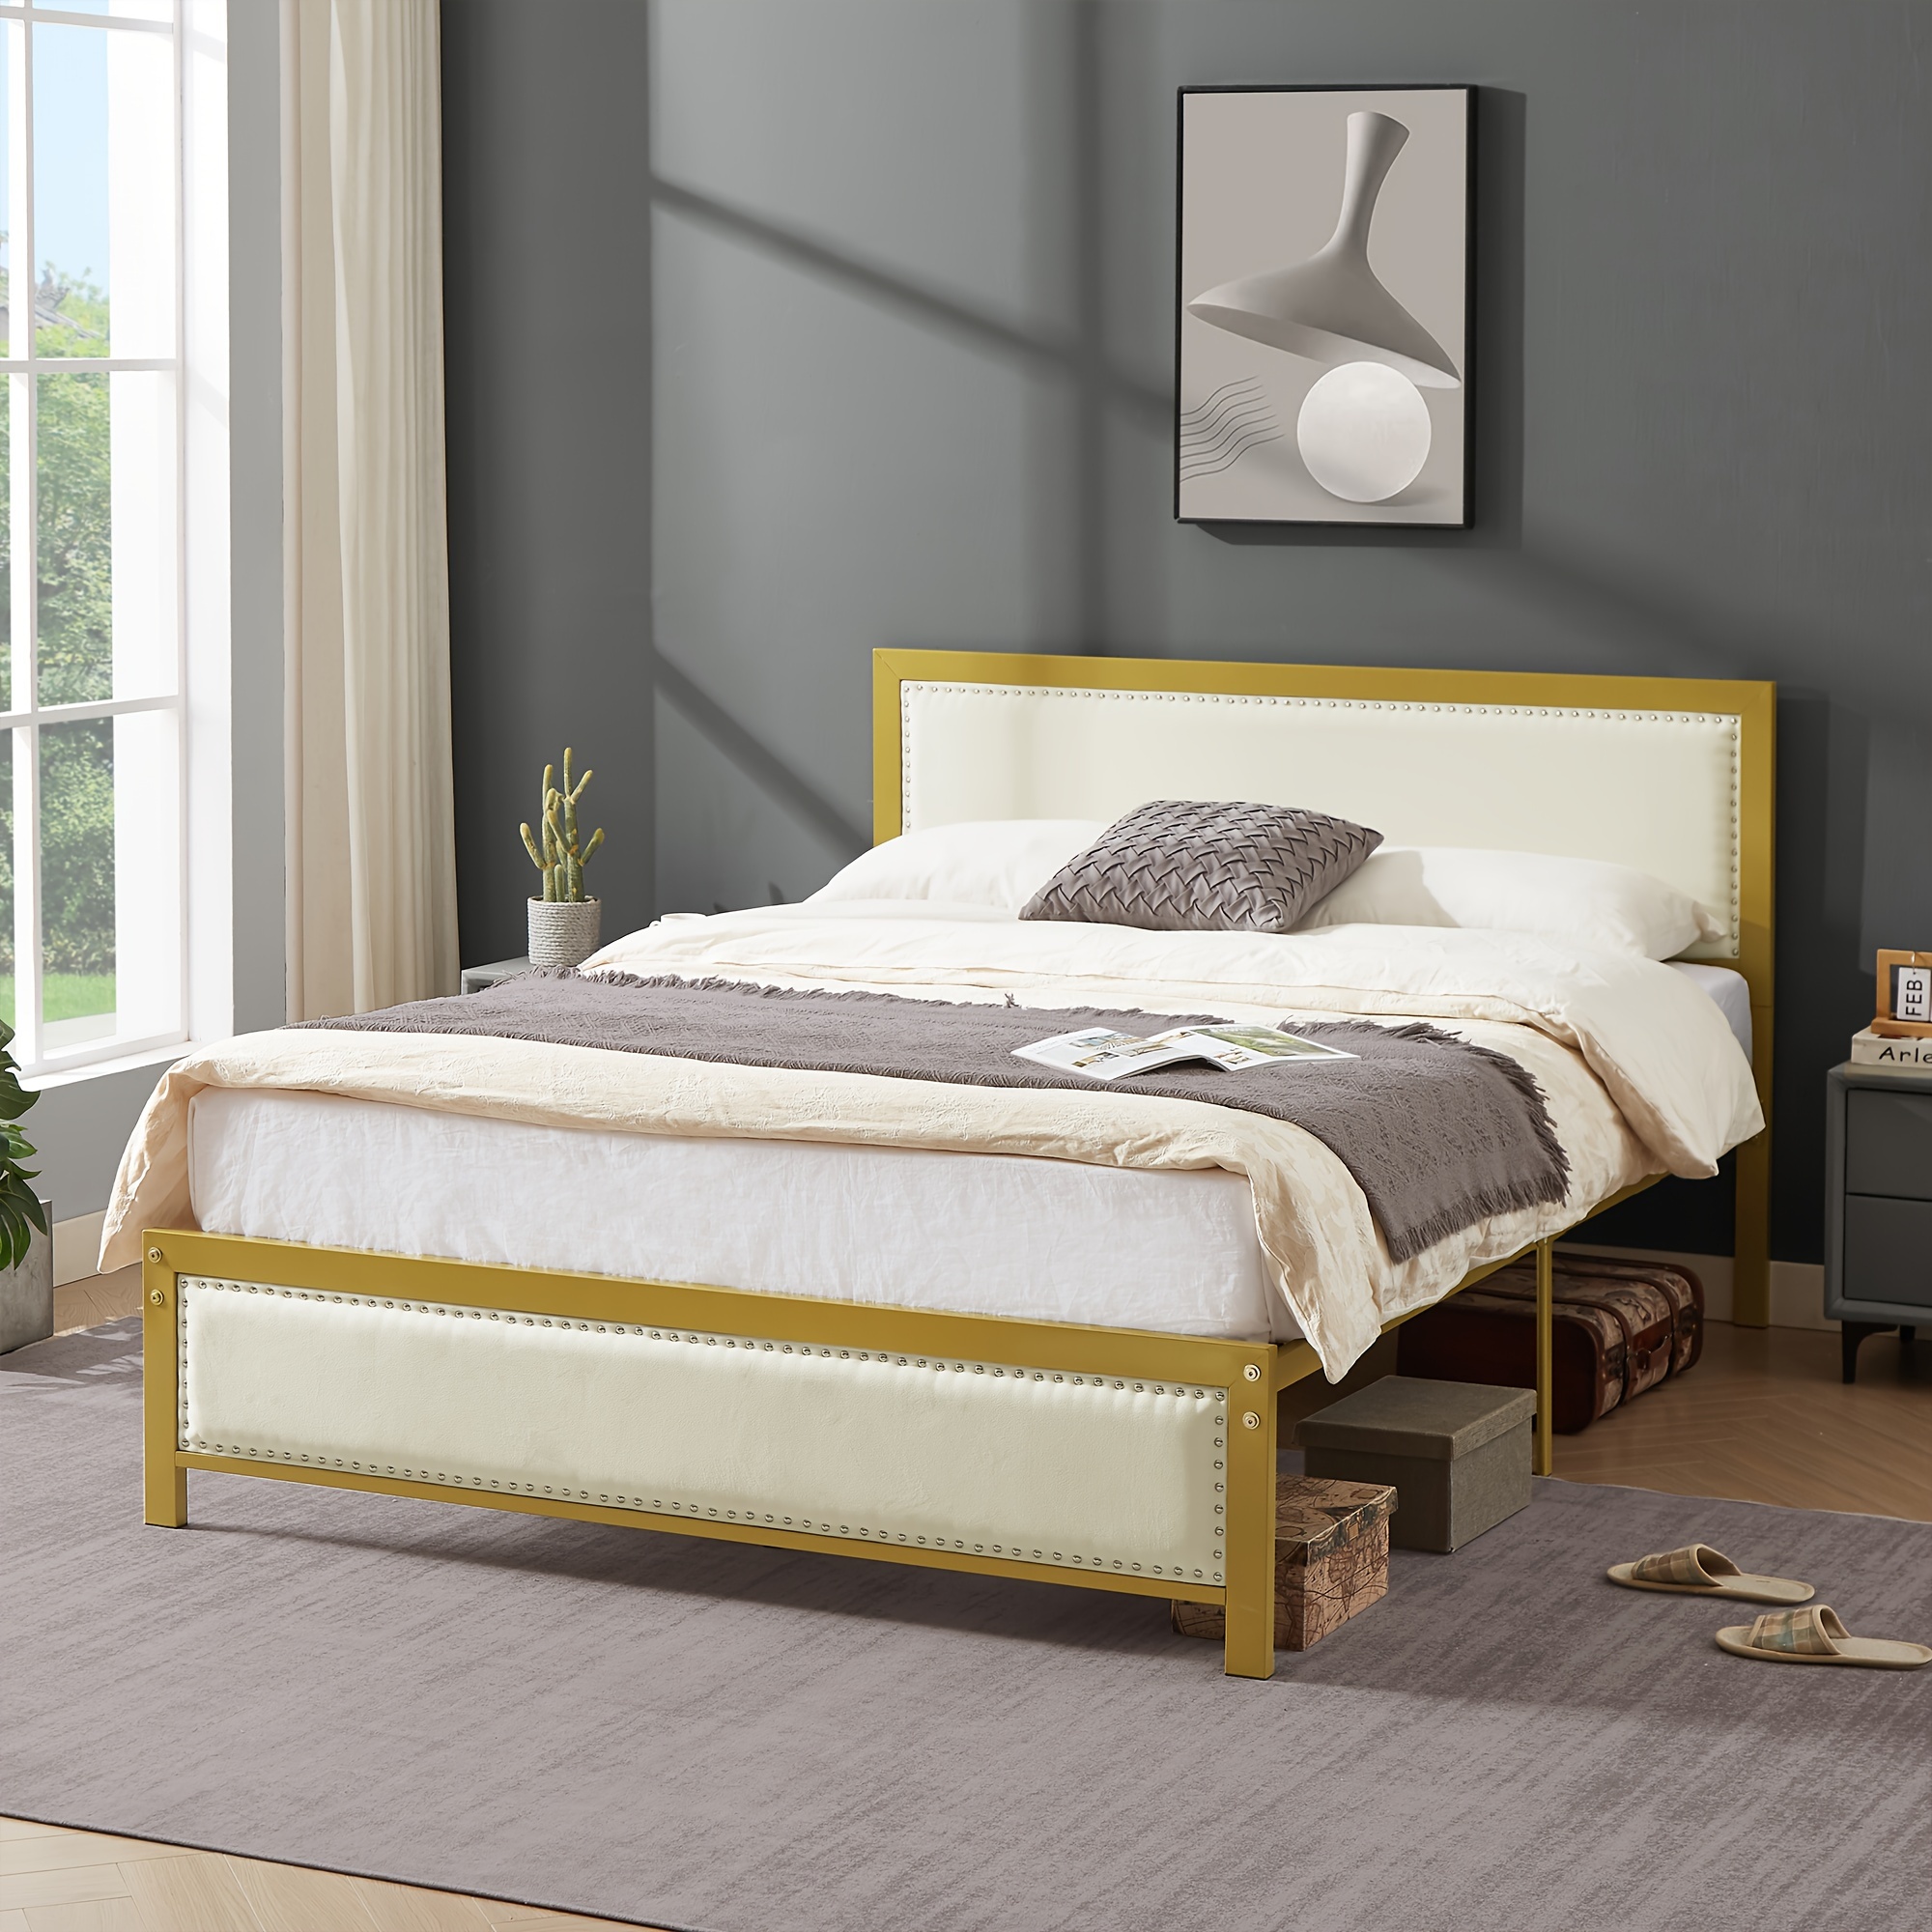 

Vecelo Upholstered Platform Bed Twin/ Full/ Queen Size Bed Frame With Headboard/footboard, Easy Assembly